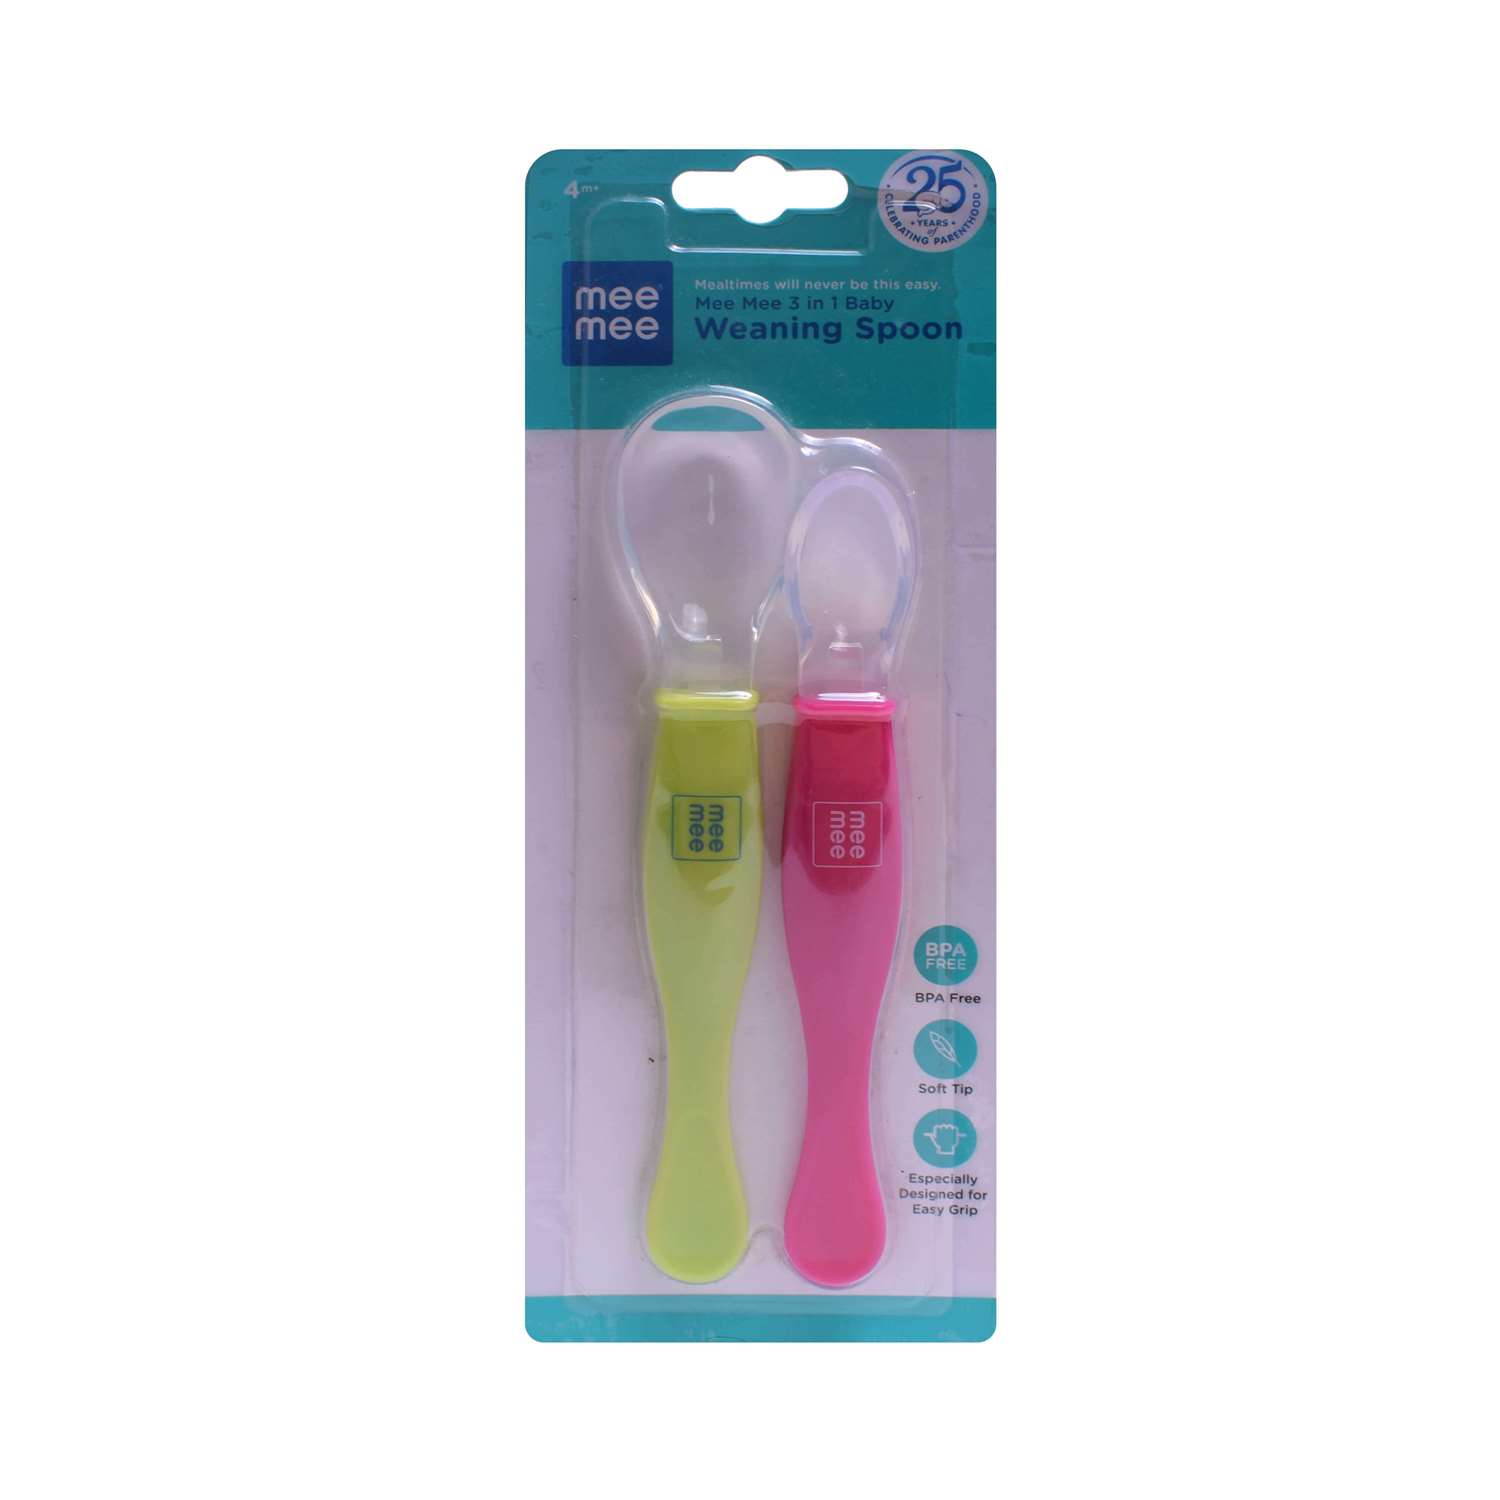 MEE MEE 3 in 1 Weaning Silicon Spoons Pink & Green 2P Set 4+m Age